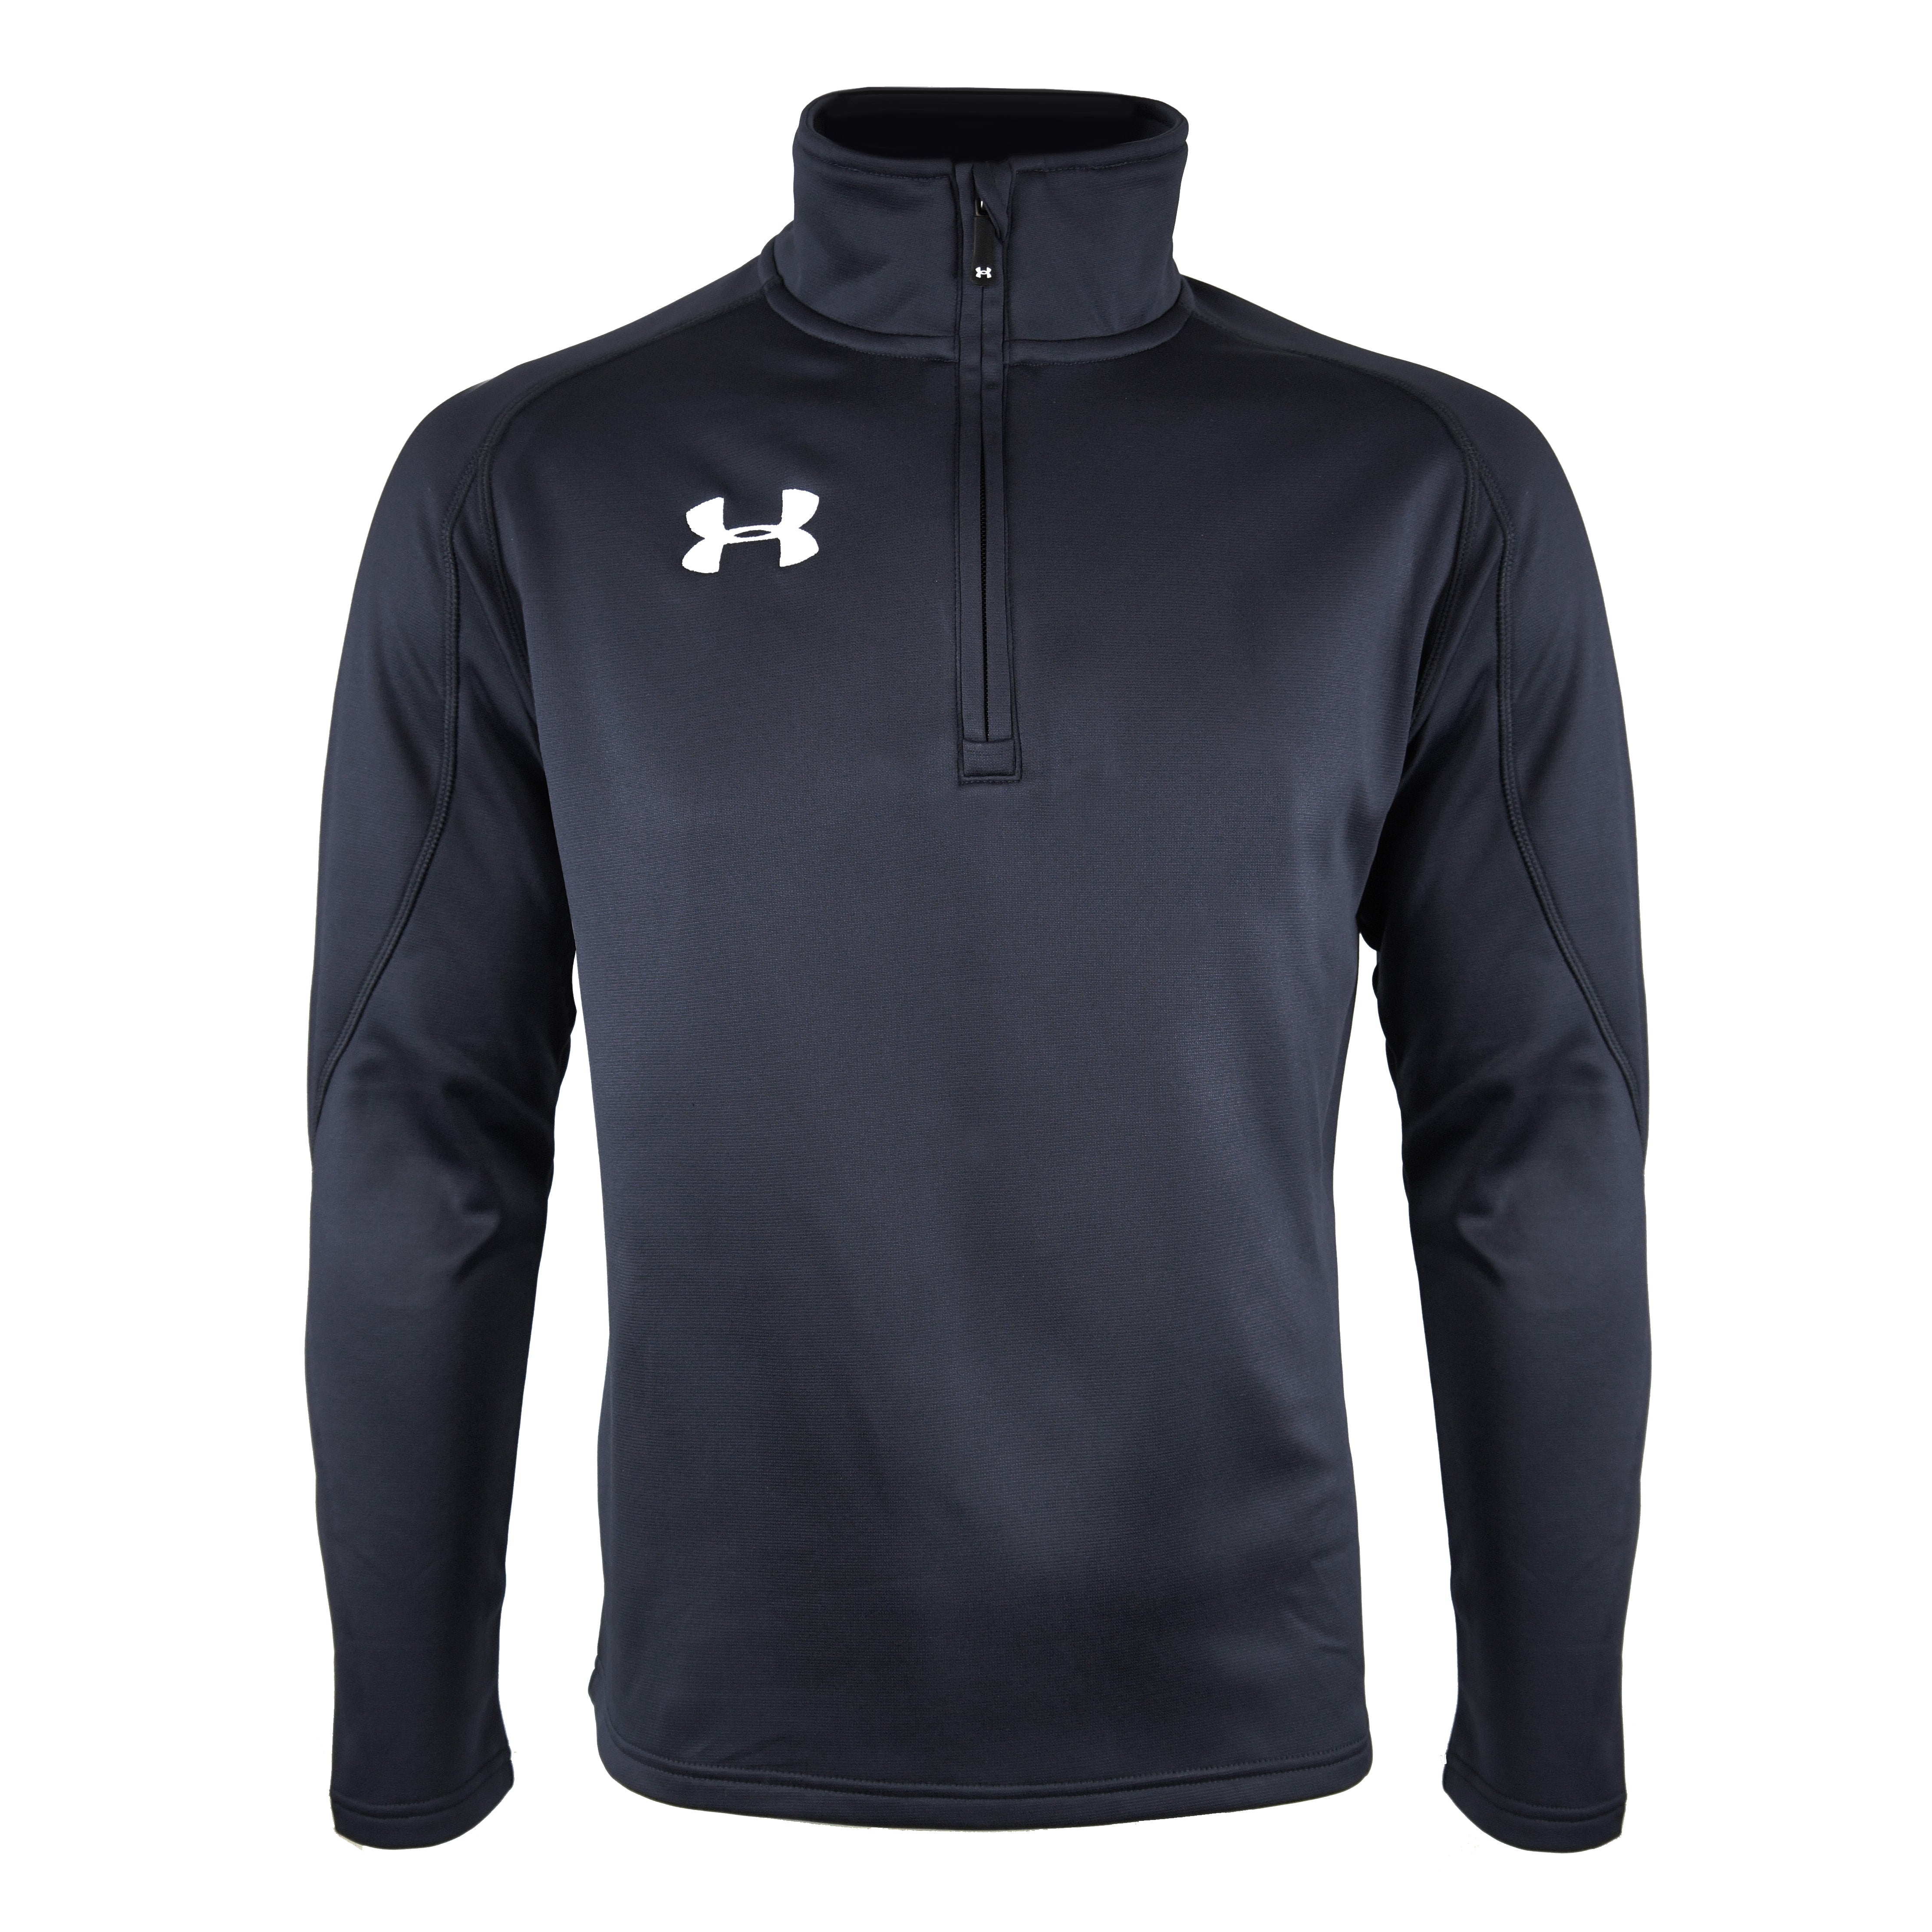 Under Armour personalised clothing One Stop Promotions